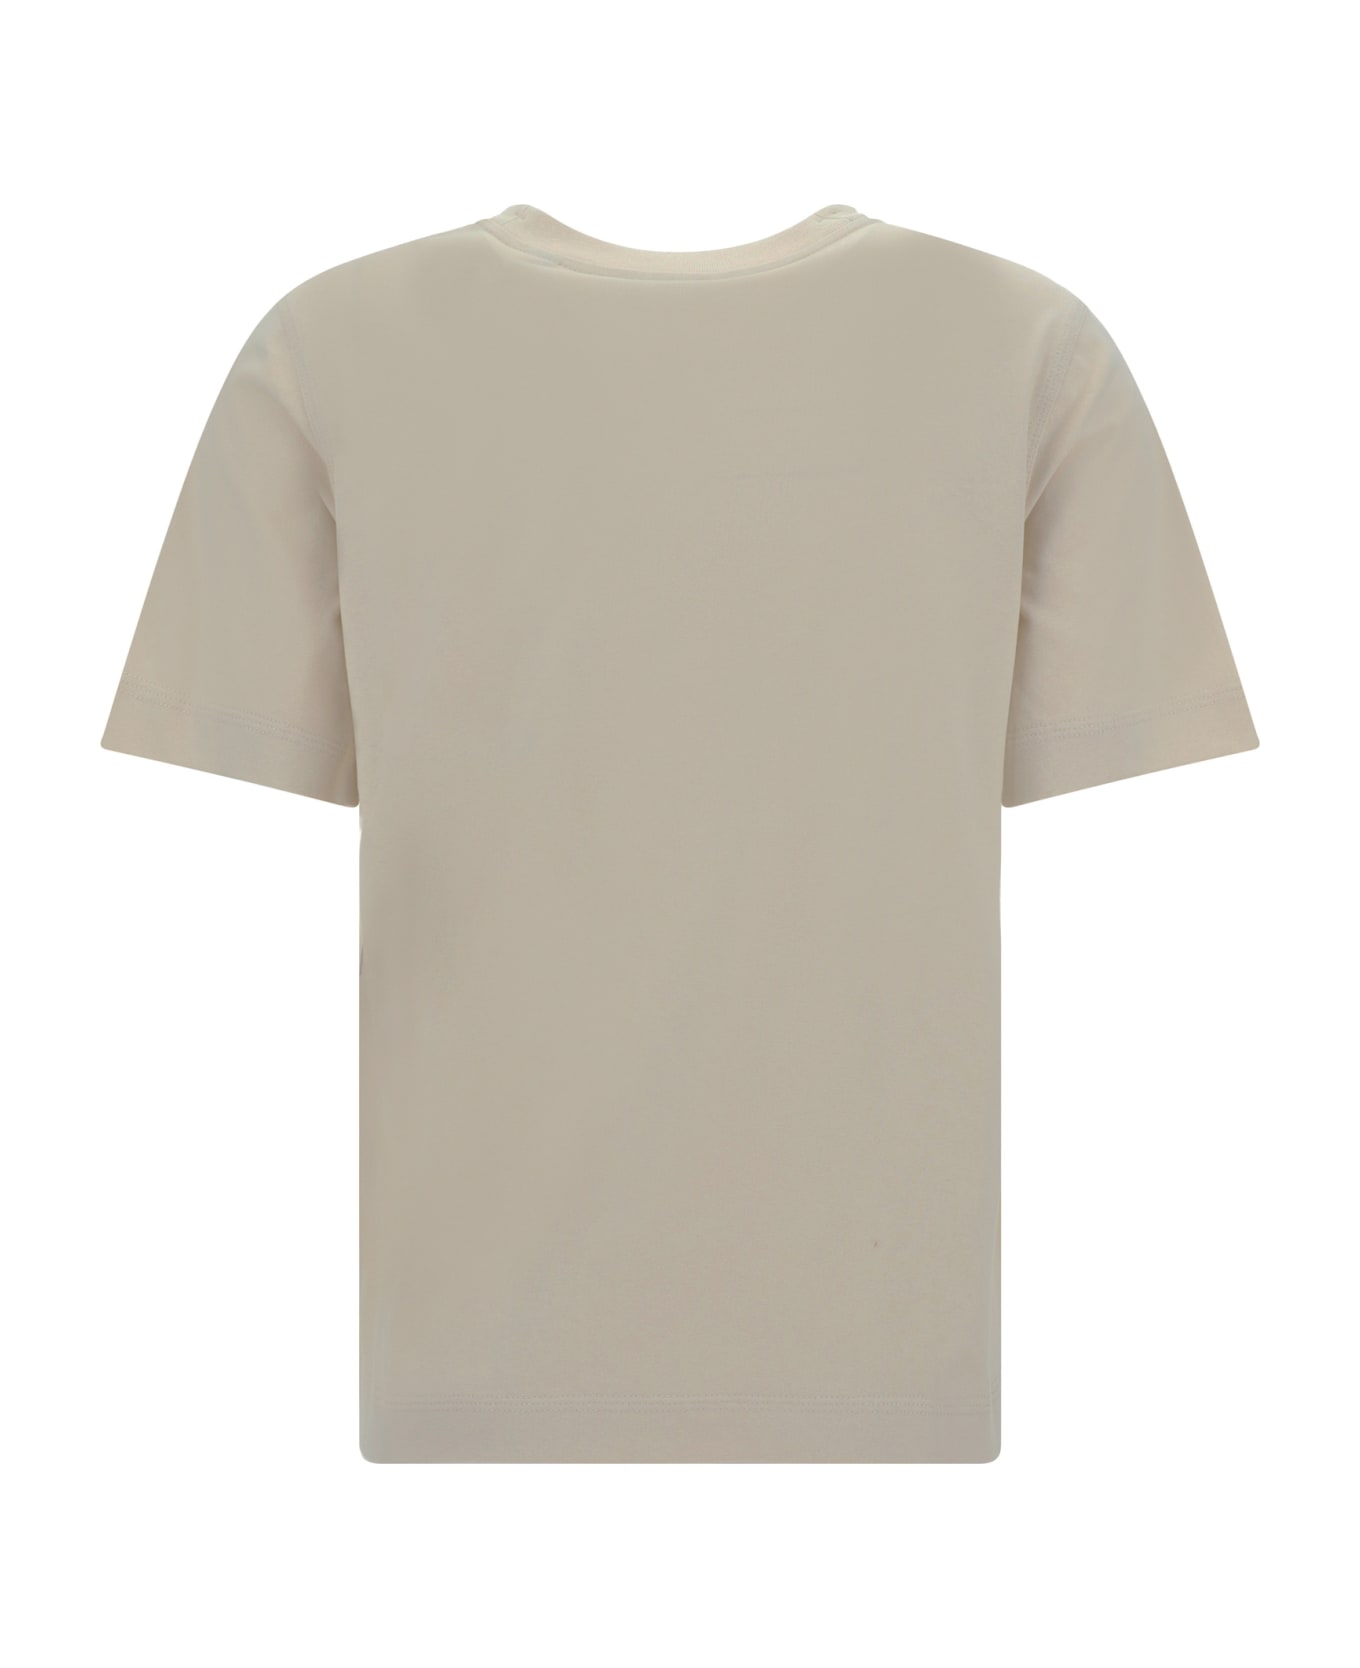 Burberry T-shirt - Soap/pansy